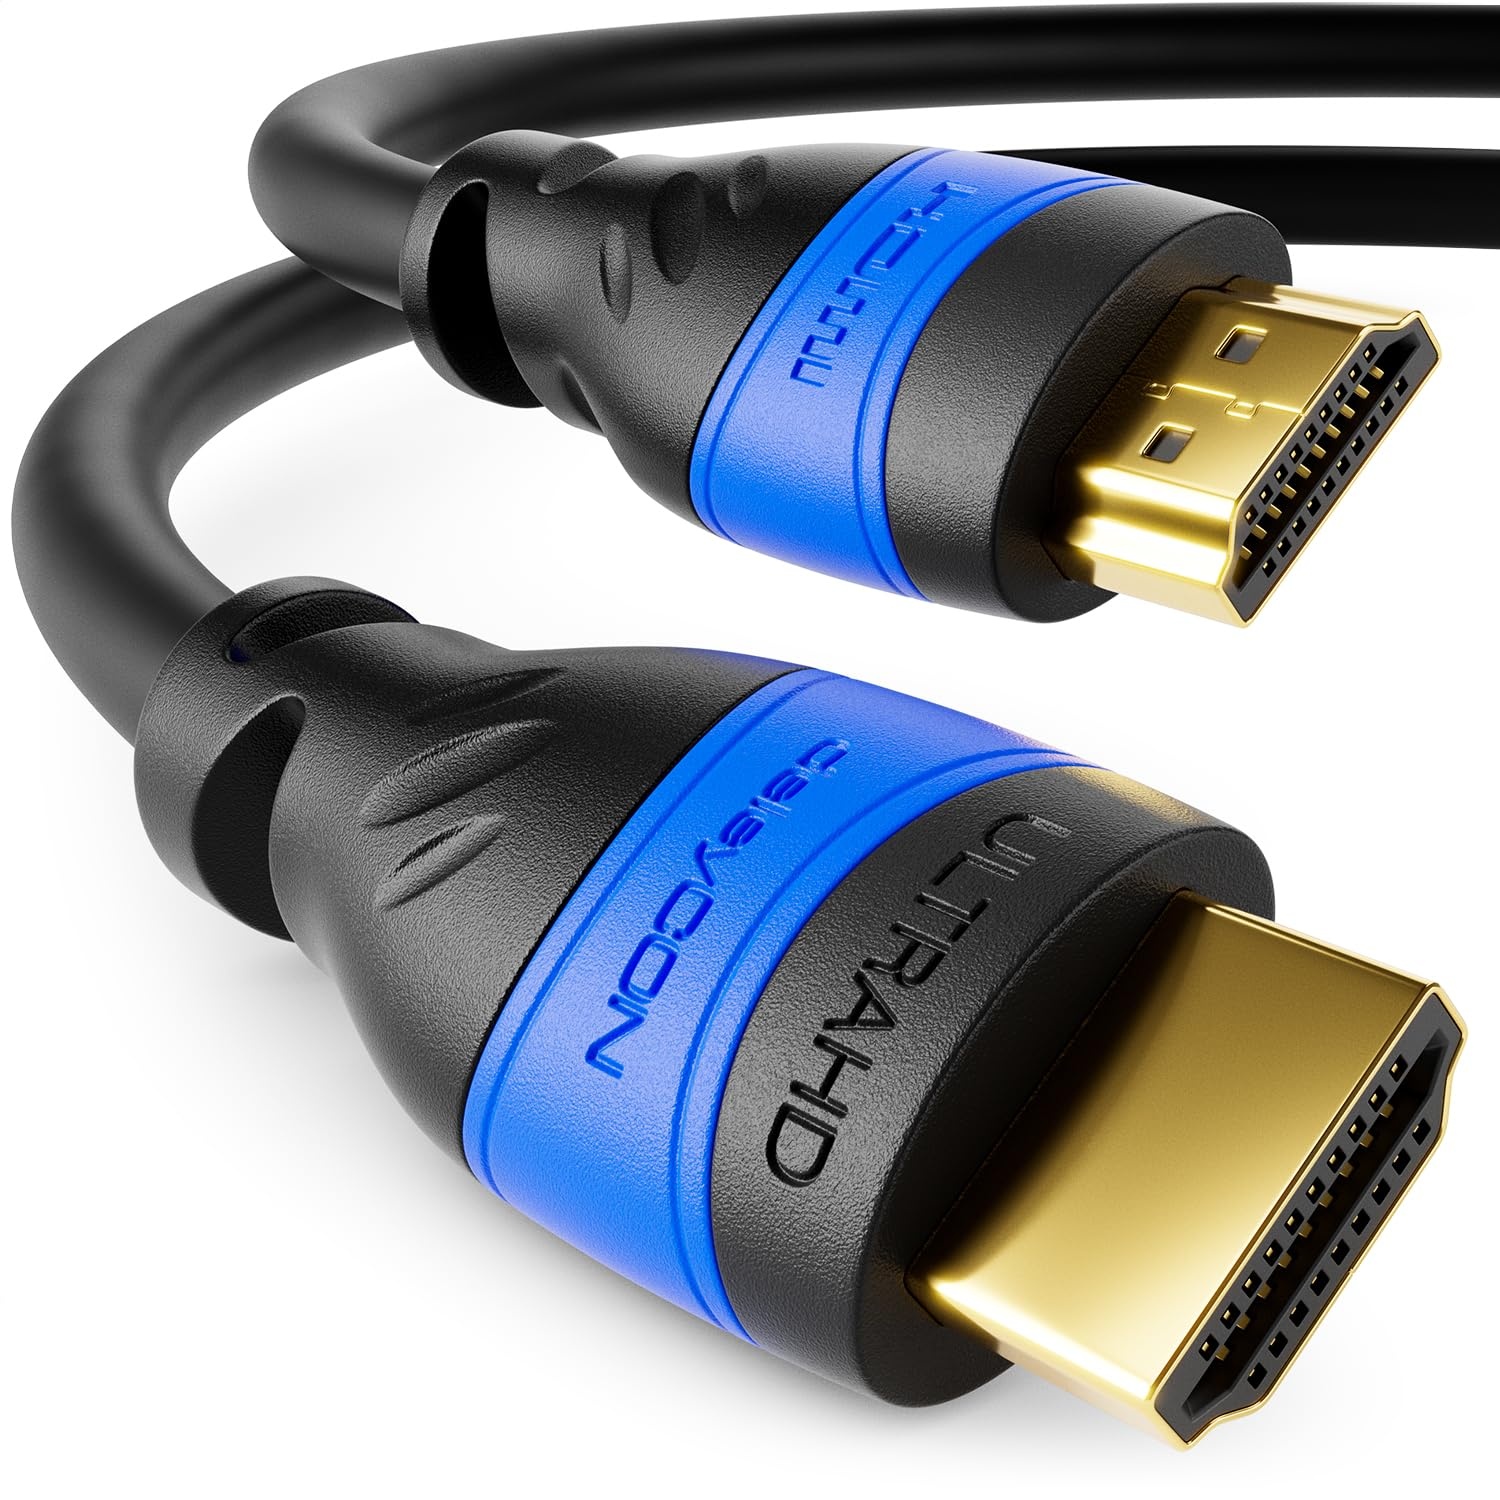 deleyCON 5m HDMI Kabel 2.0a/b - High Speed mit Ethernet - UHD 2160p 4K@60Hz 4:4:4 HDR HDCP 2.2 ARC CEC Ethernet 18Gbps 3D Full HD 1080p Dolby - Schwarz